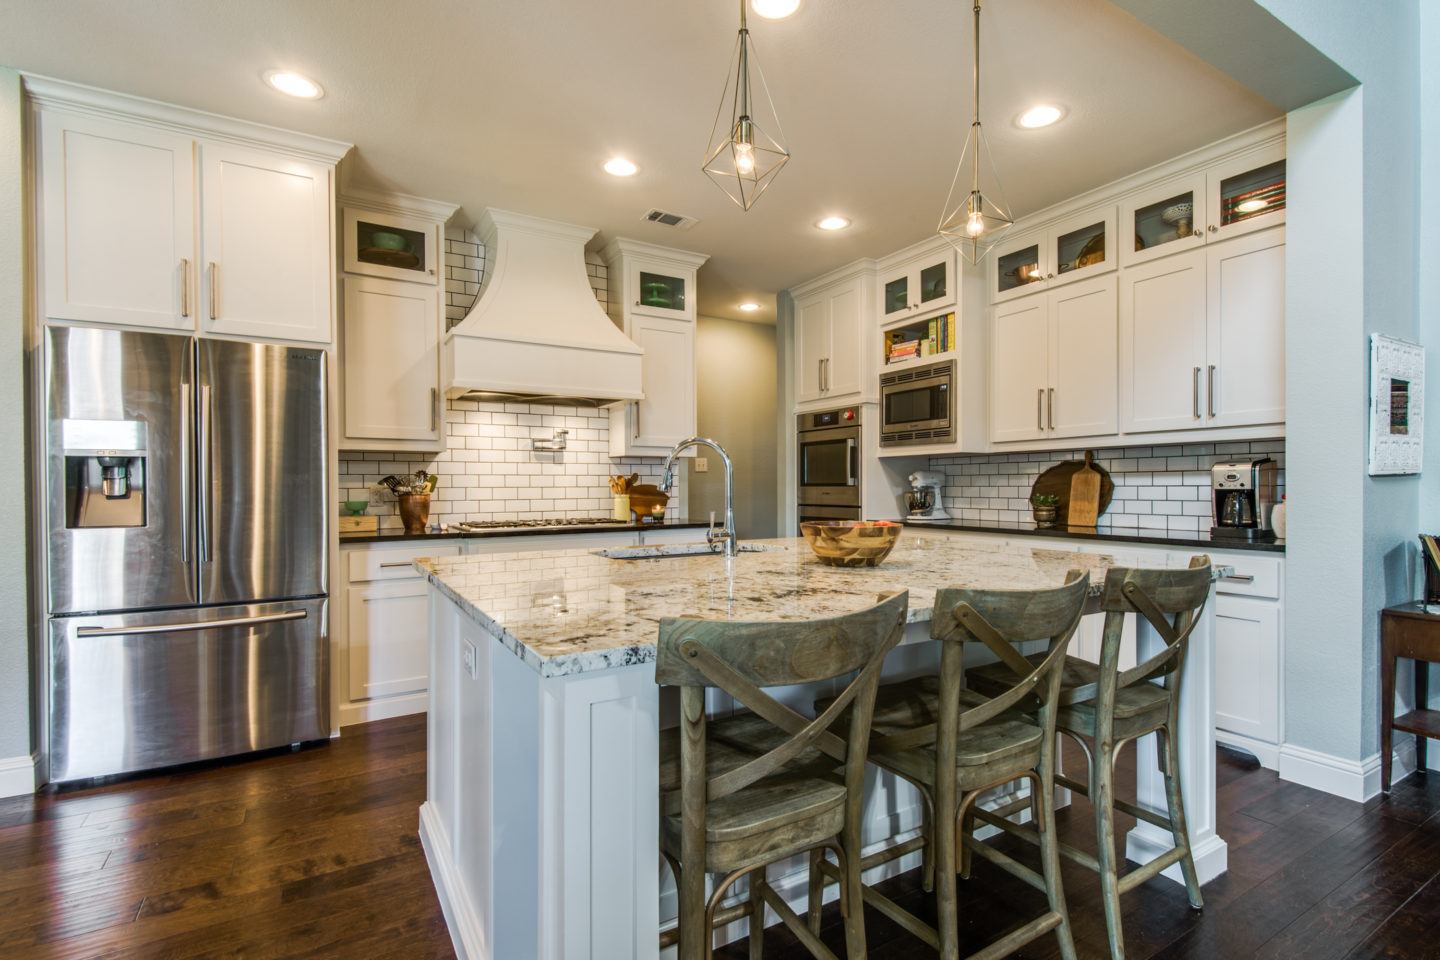 2020 Kitchen Design Trends Dfw Improved,Most Commonly Googled Questions